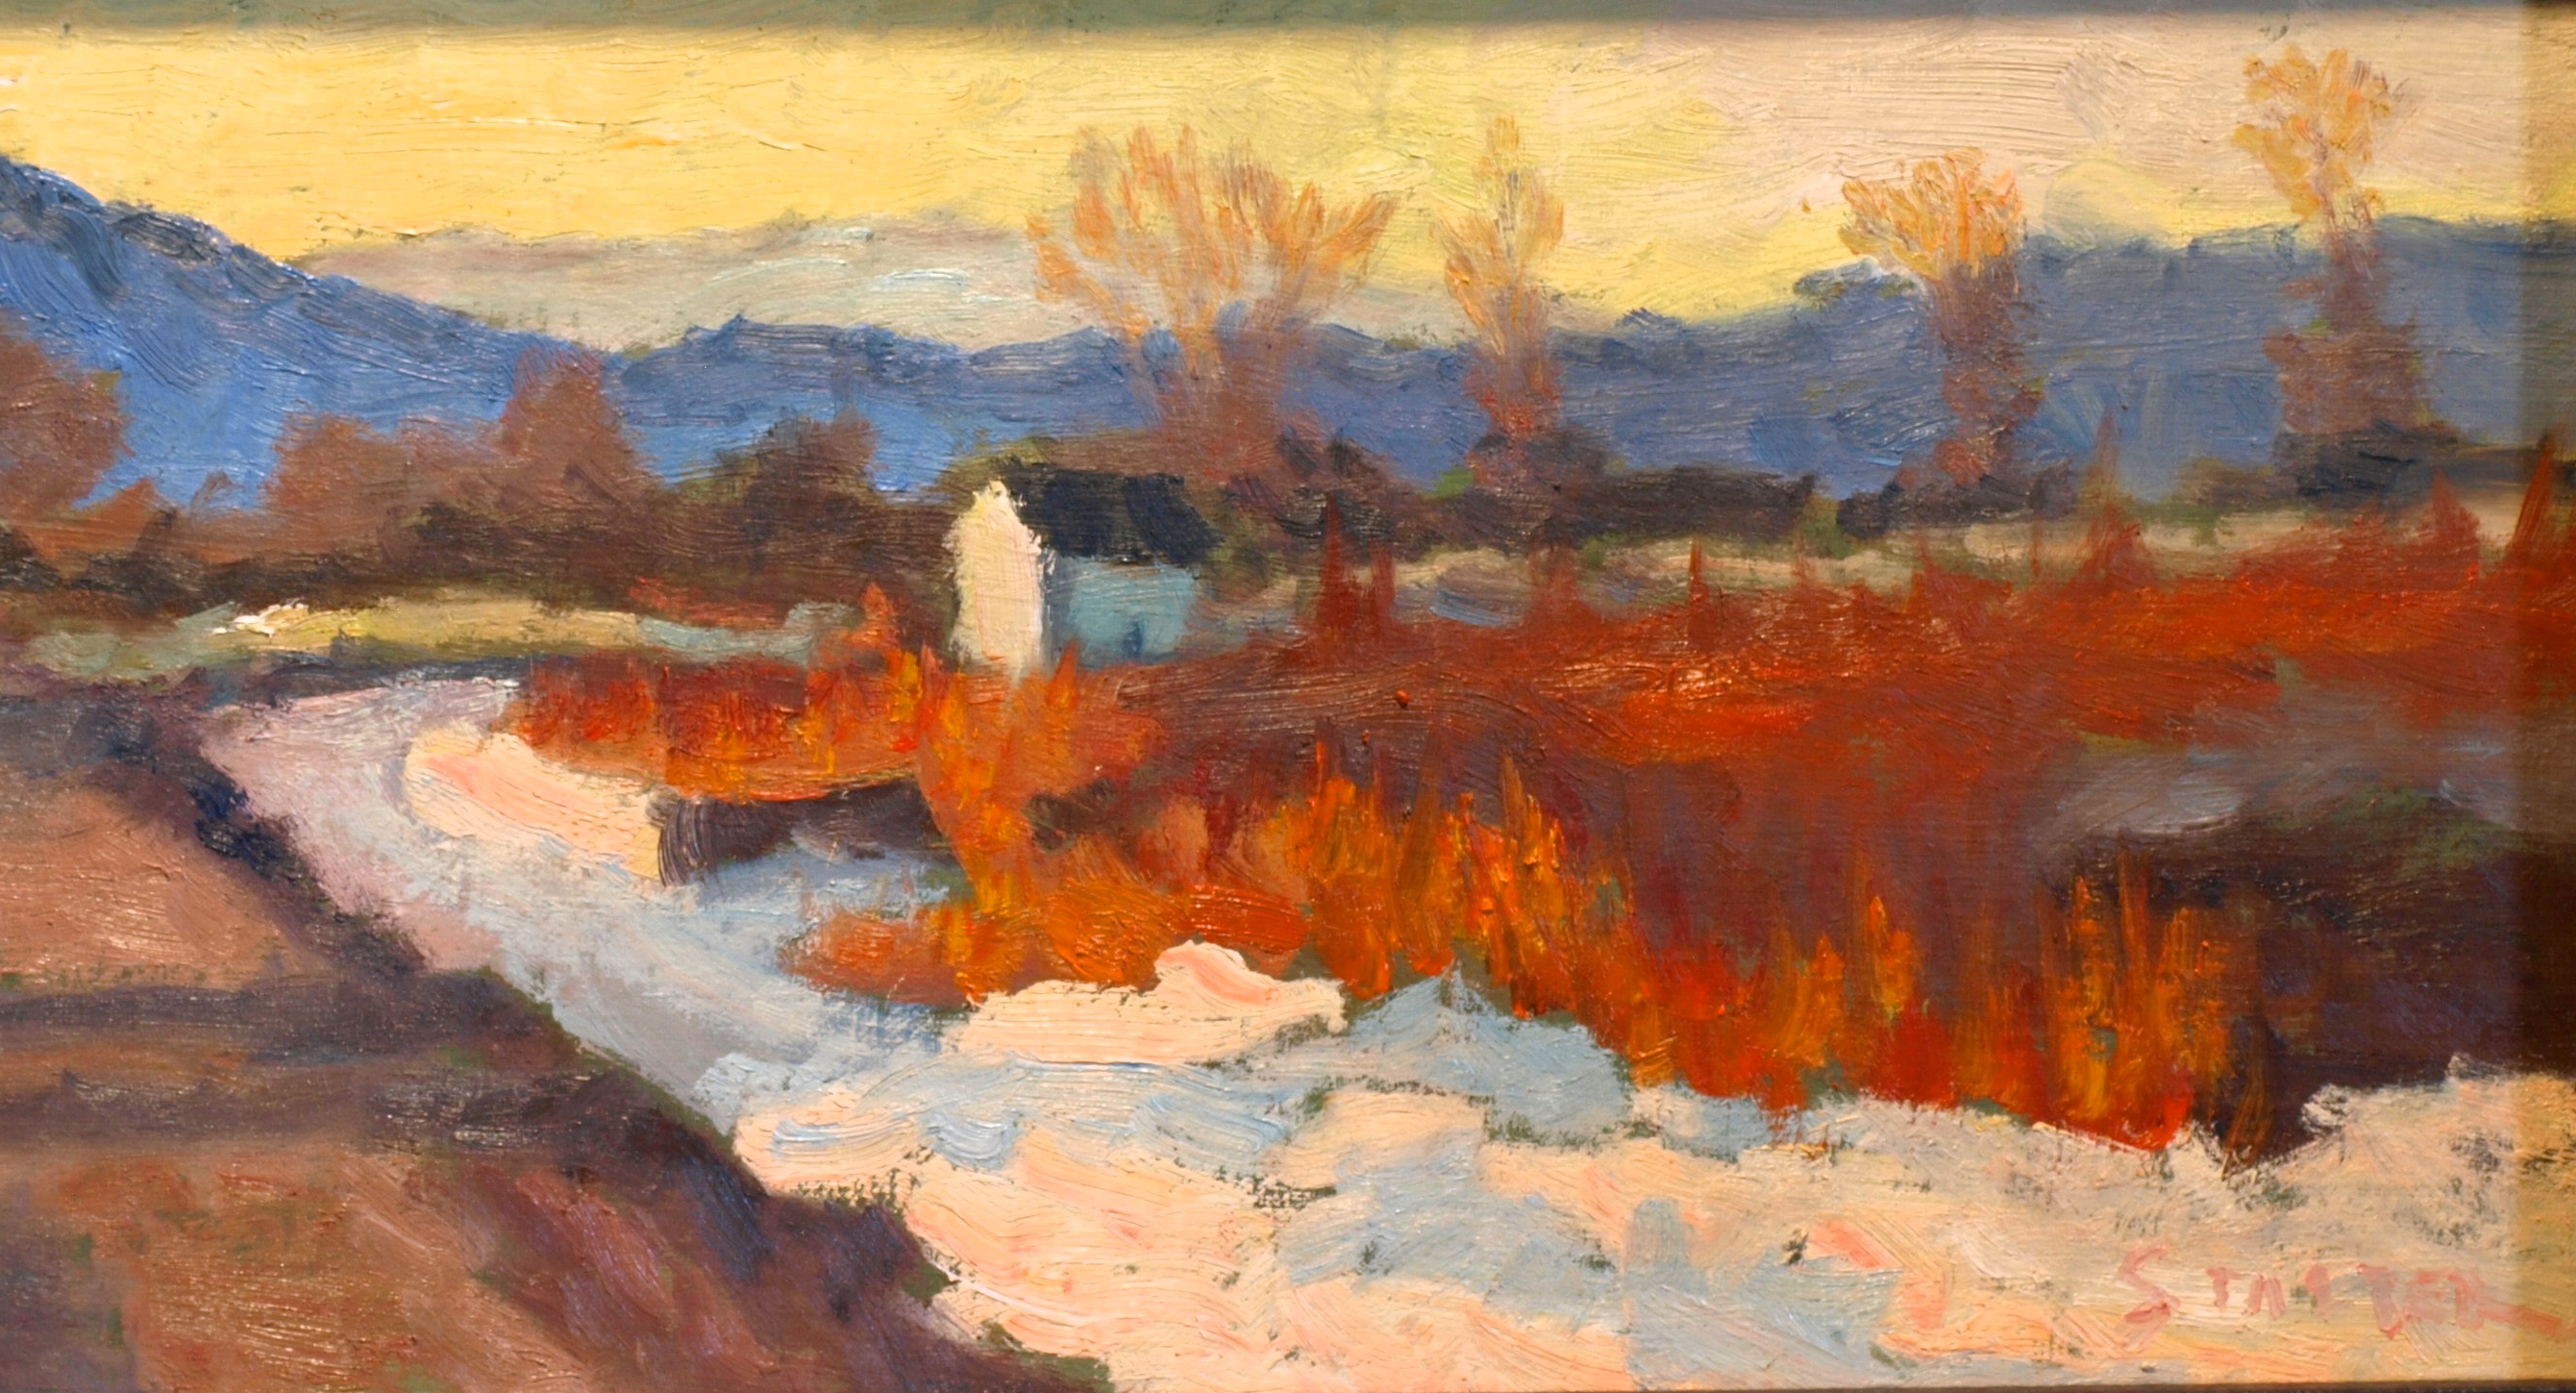 Brilliant Winter Day, Oil on Canvas on Panel, 8 x 14 Inches, by Richard Stalter, $220